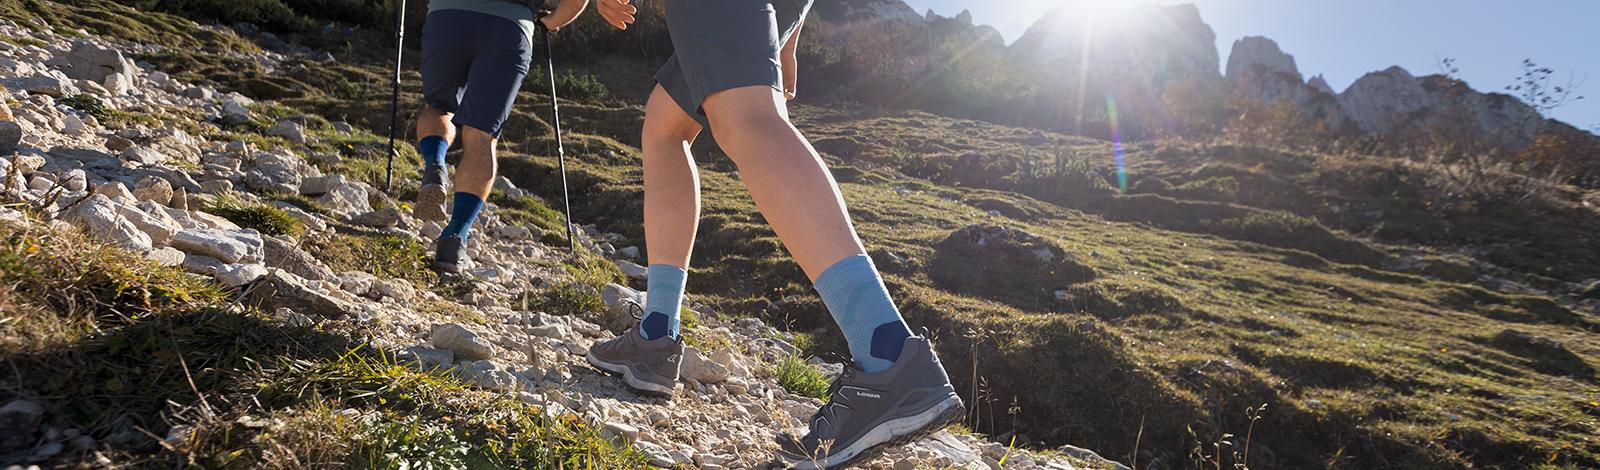 Close upholstery of a hiker in hiking shoes and with green medium -length hiking socks that go up a stony path in the background her hiking partner